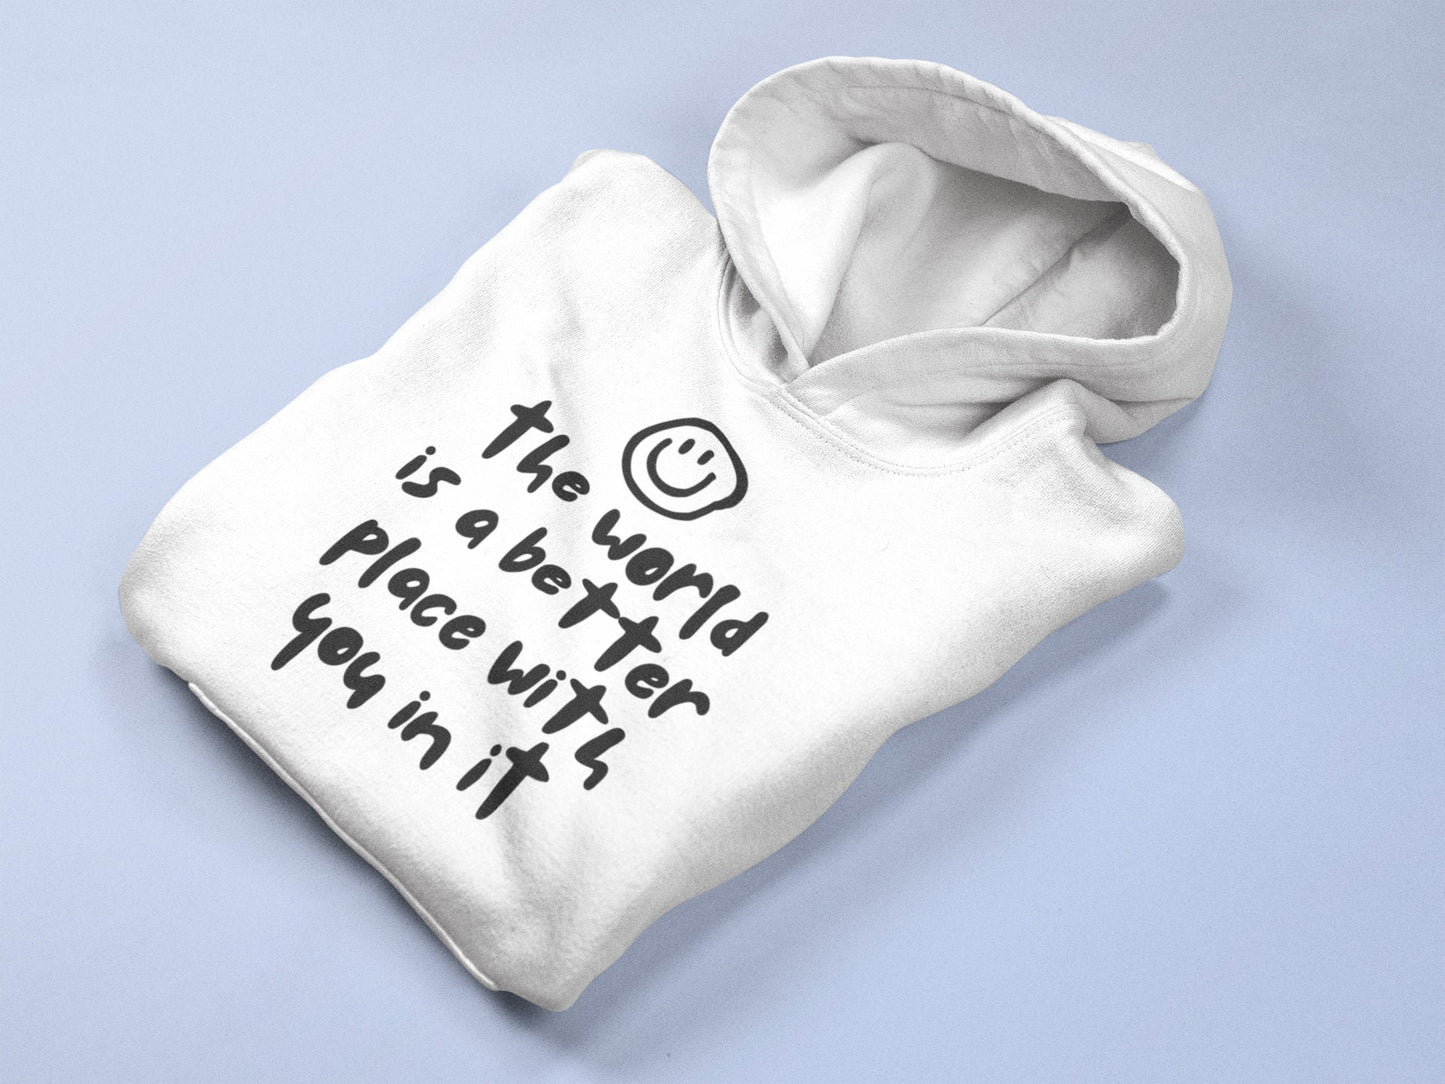 The World Is A Better Place With You In It - Hoodie / Motivational Gift, Mental Health Gifts